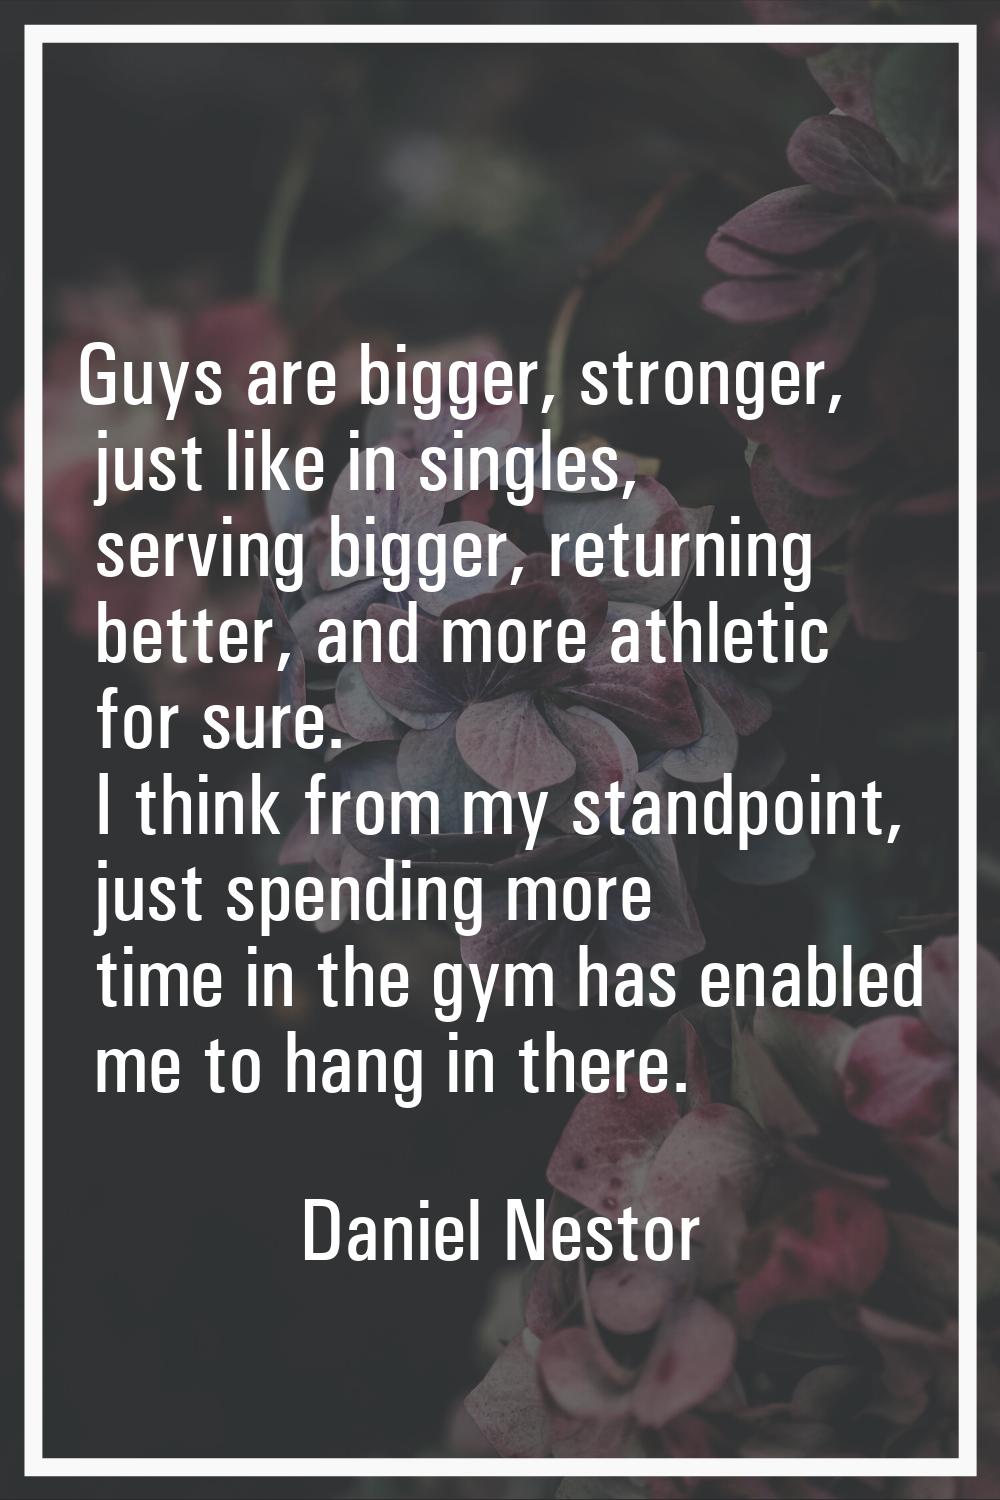 Guys are bigger, stronger, just like in singles, serving bigger, returning better, and more athleti